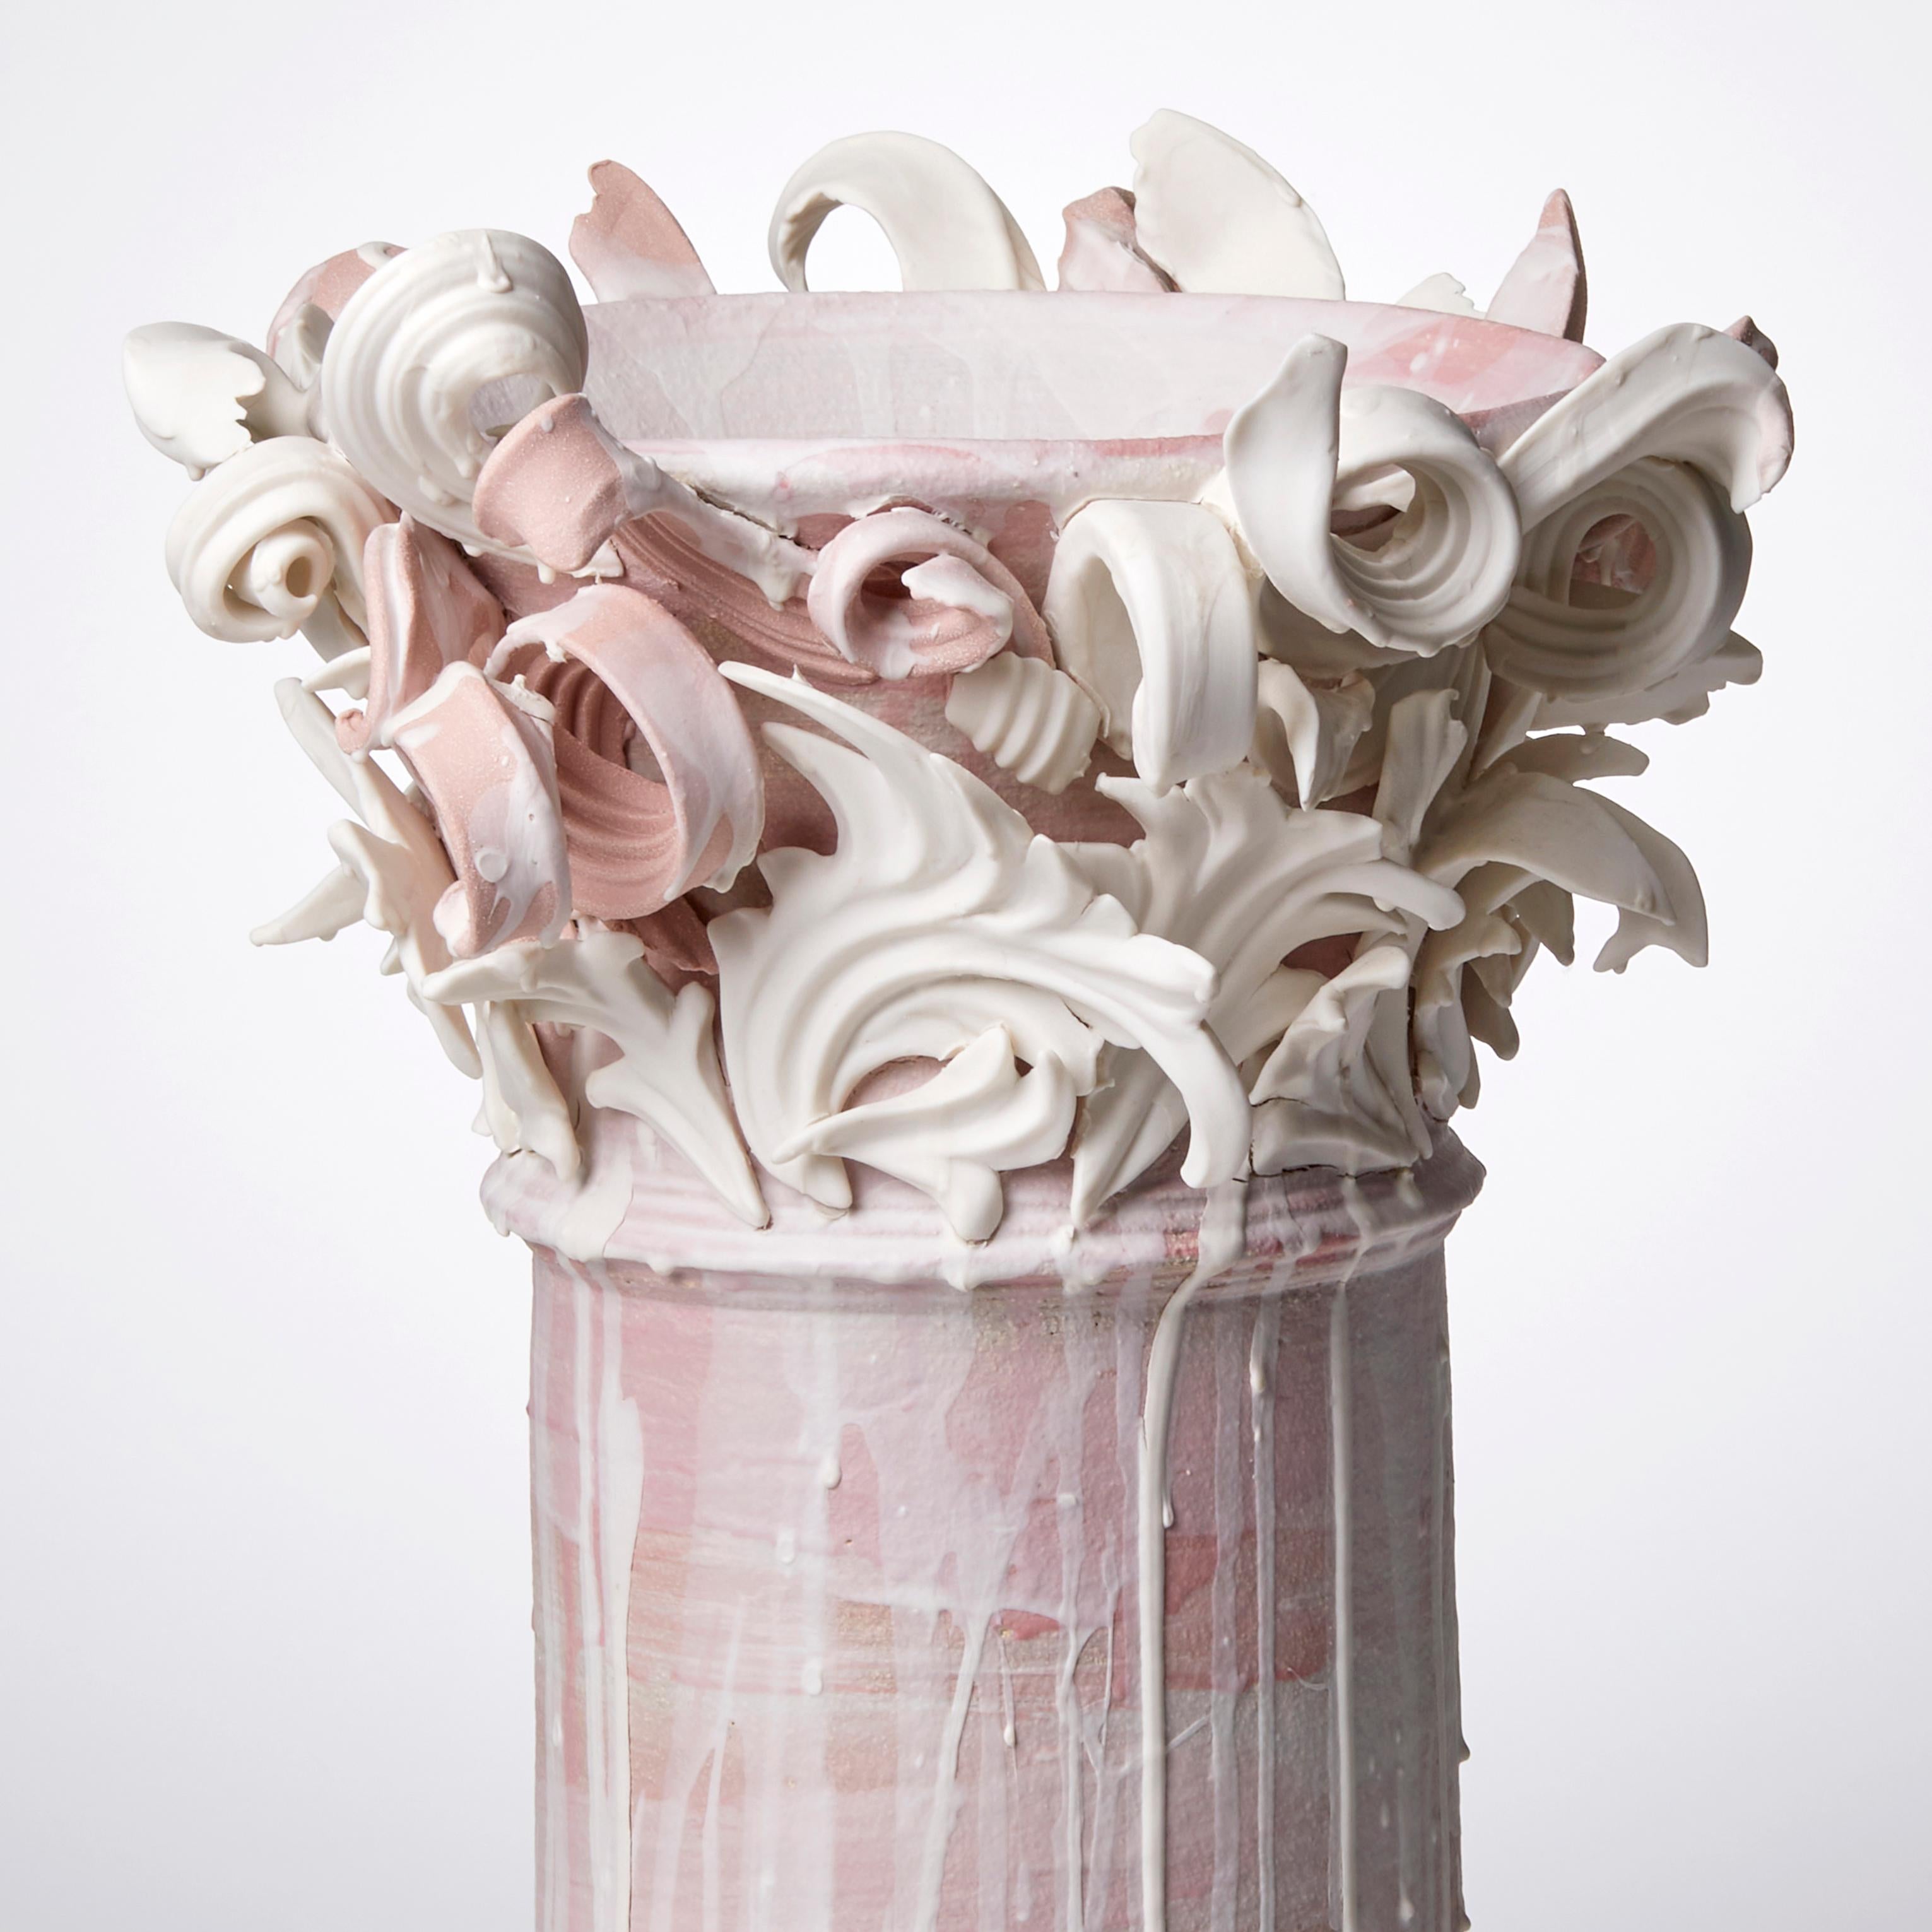 Hand-Crafted Colonnade II, a Unique Ceramic Sculptural Vase in Pink & White by Jo Taylor